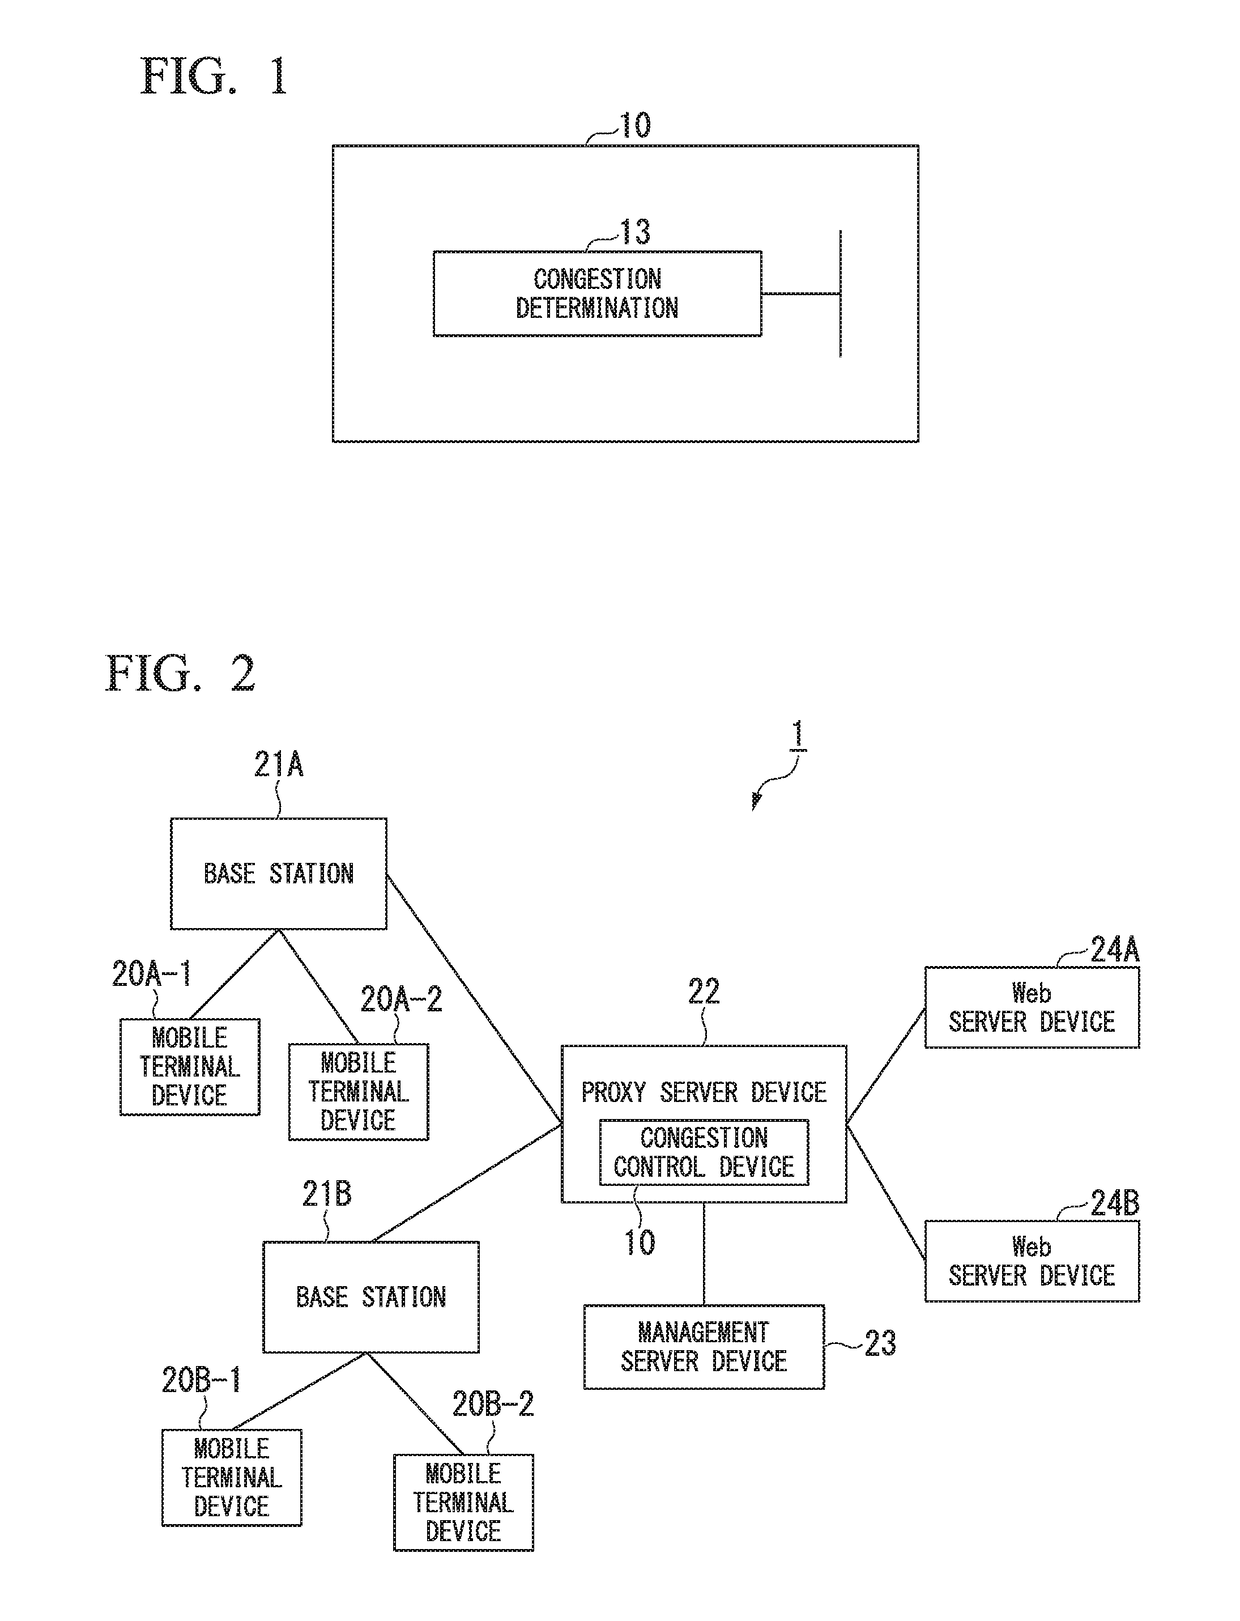 Local congestion determination method and congestion control device for mobile communication